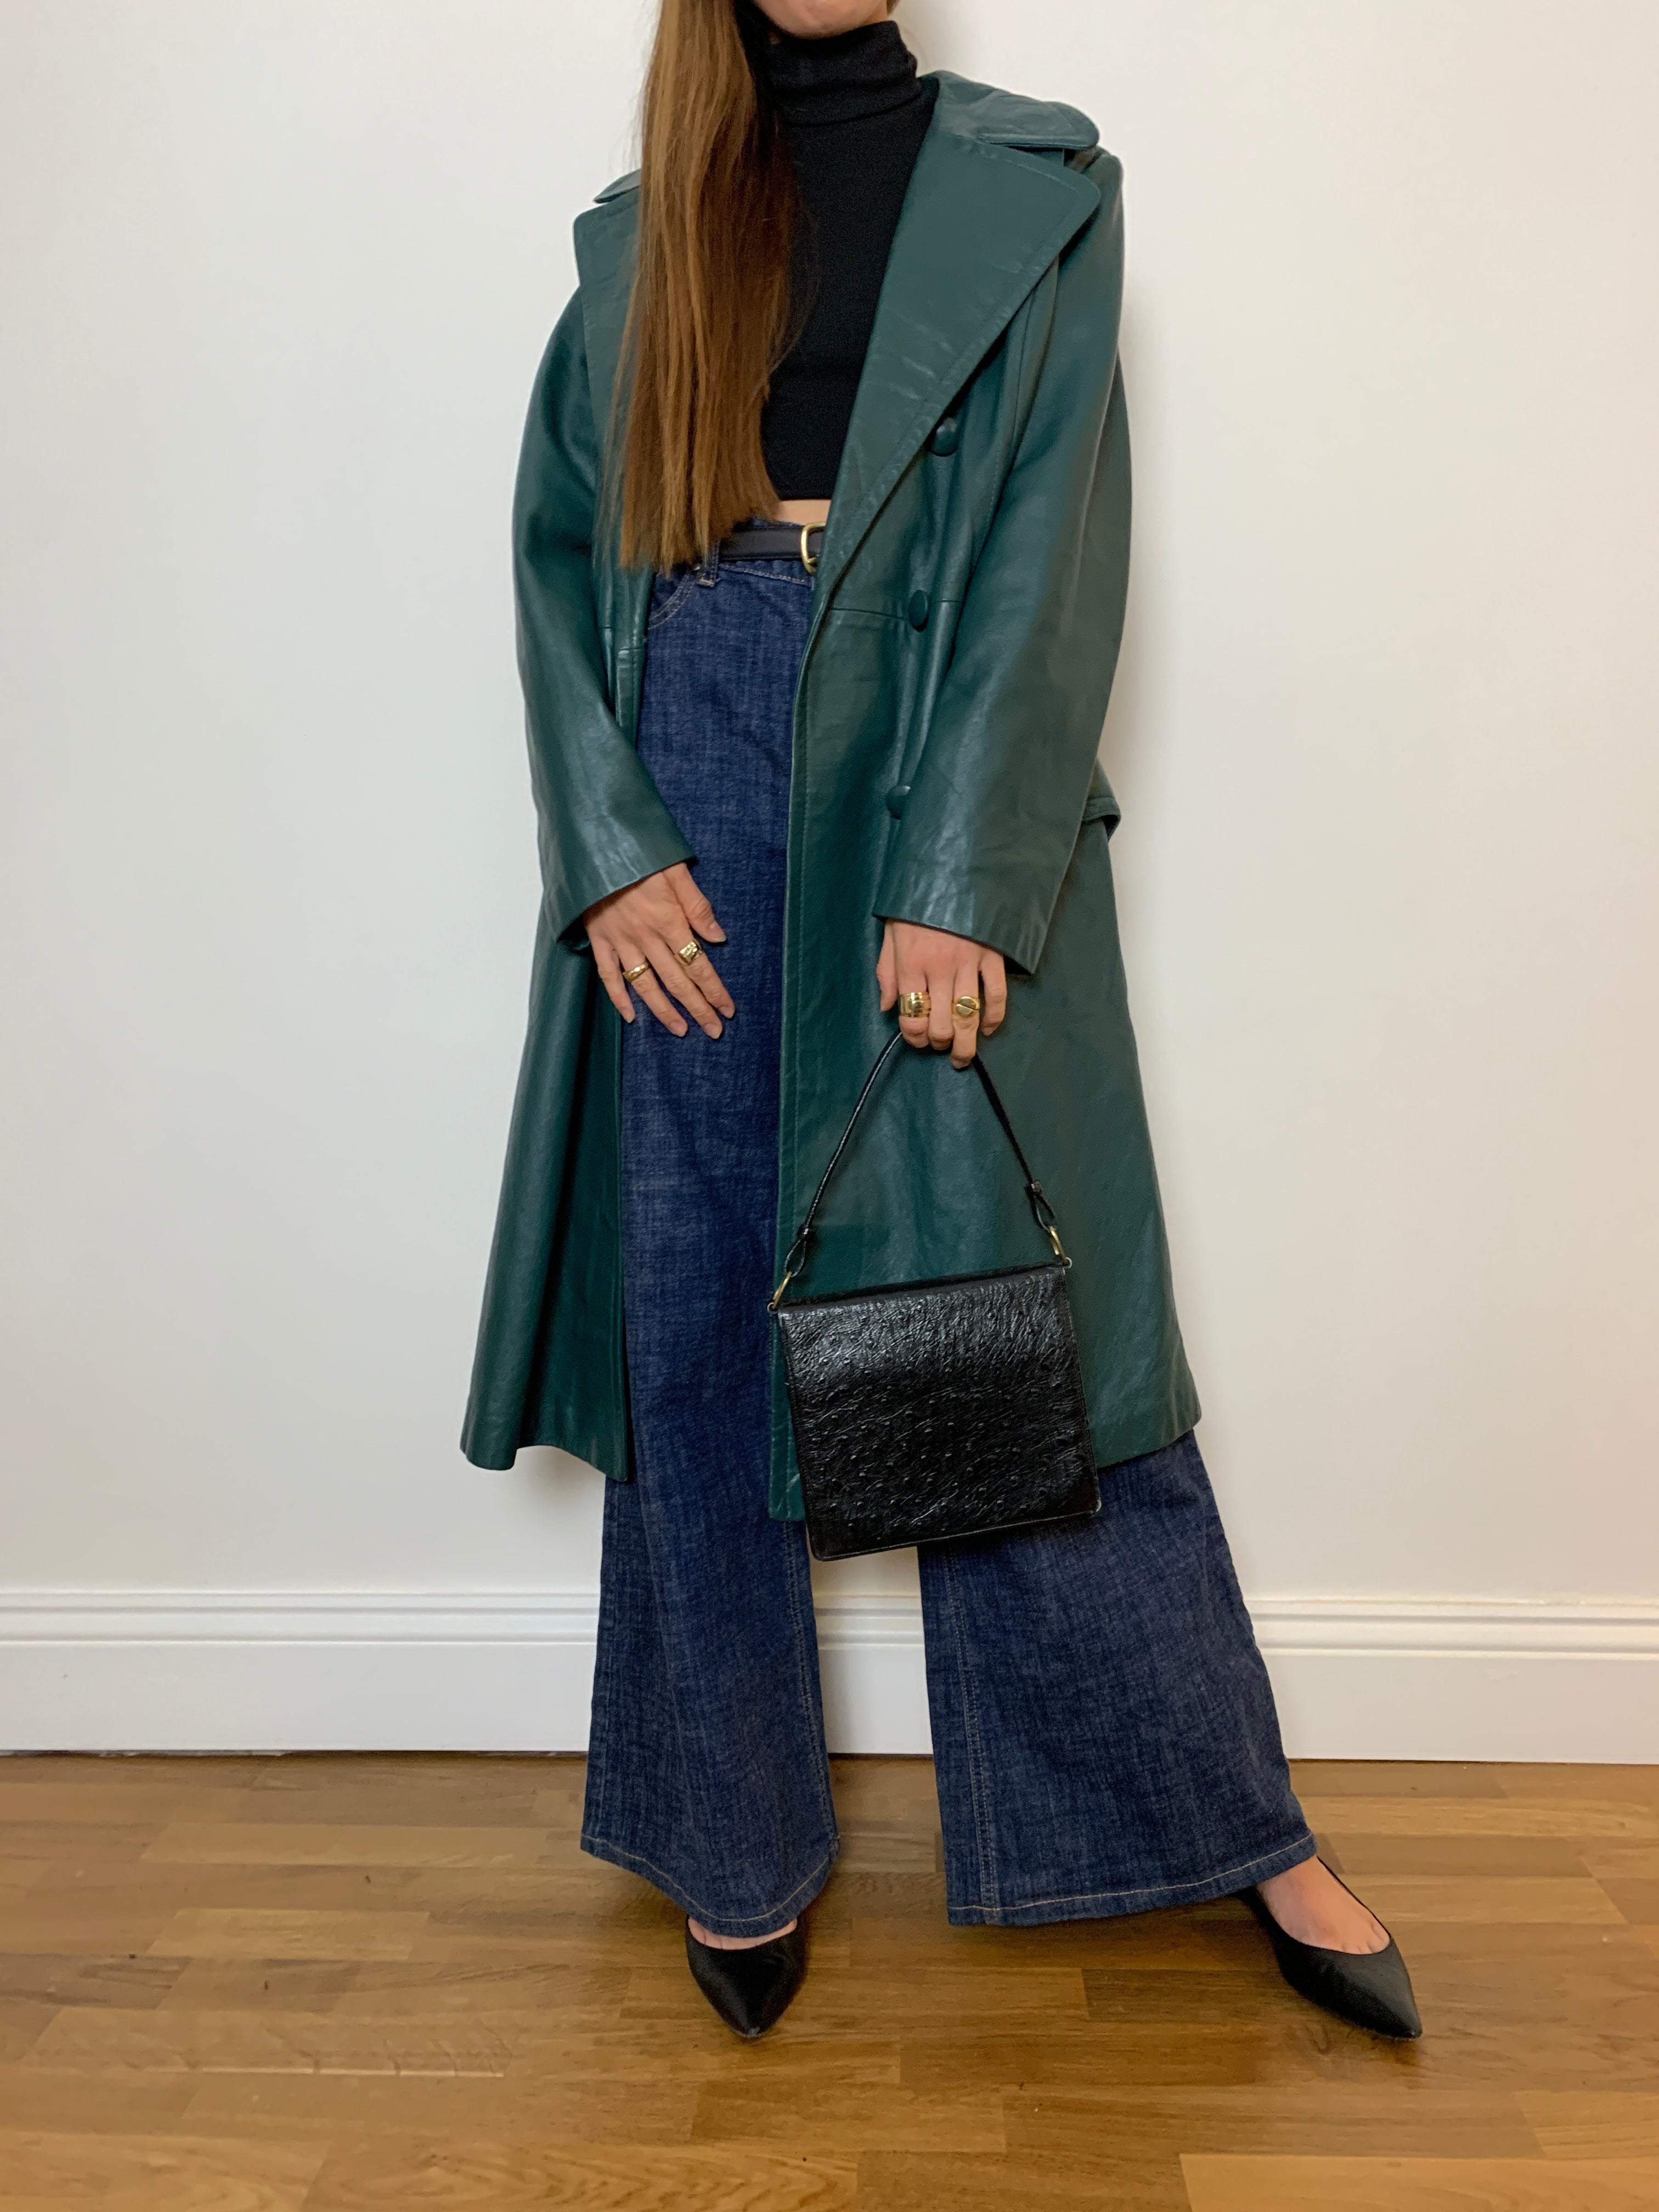 Vintage green leather trench coat